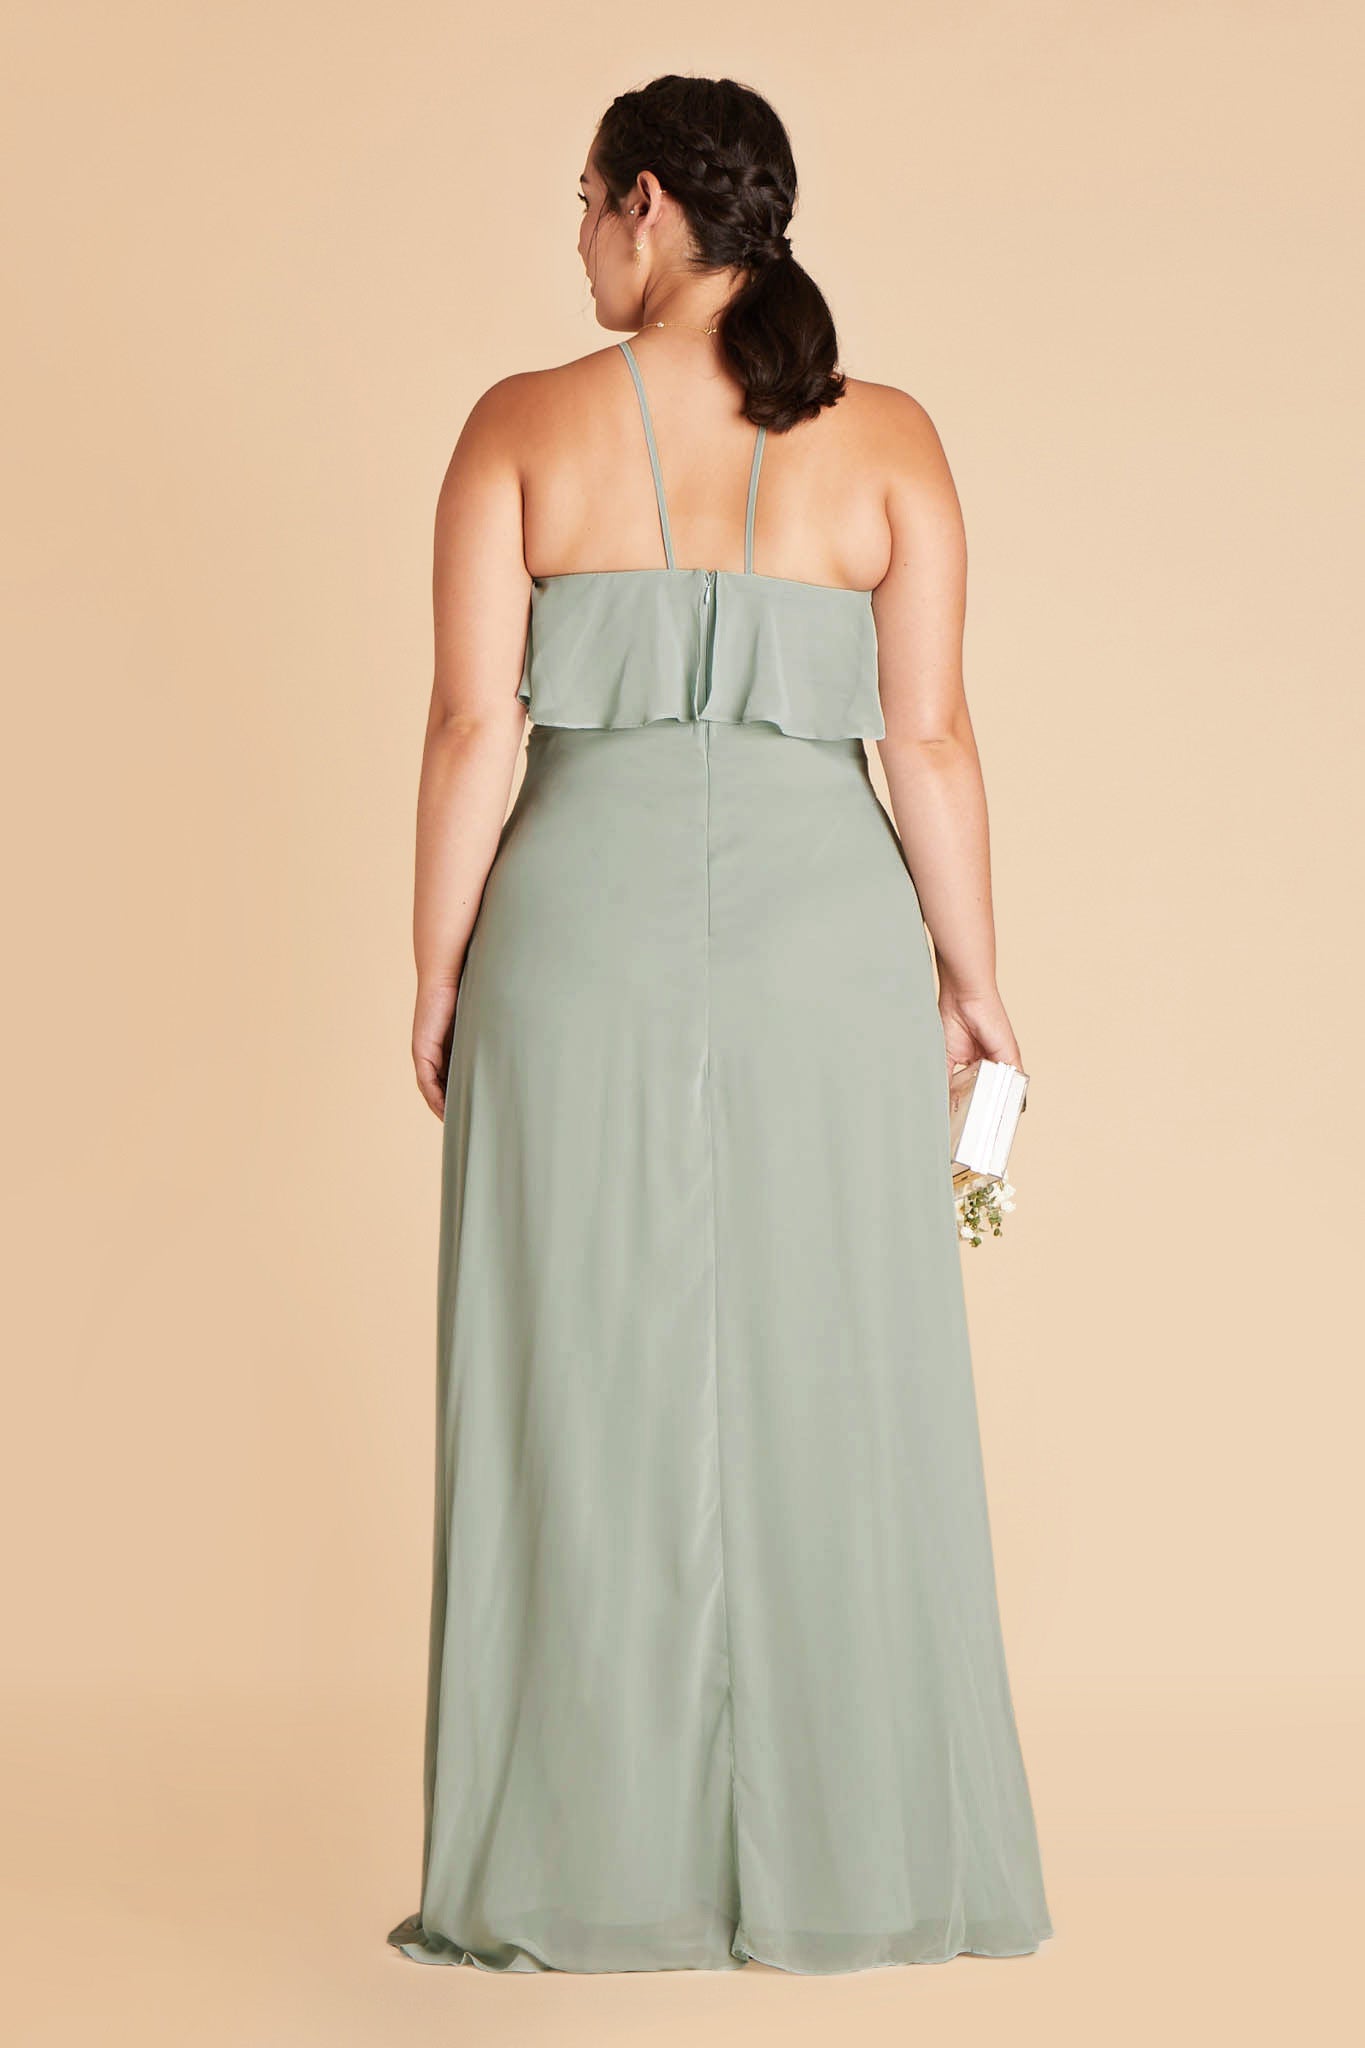 Jules plus size bridesmaid dress in sage green chiffon by Birdy Grey, back  view